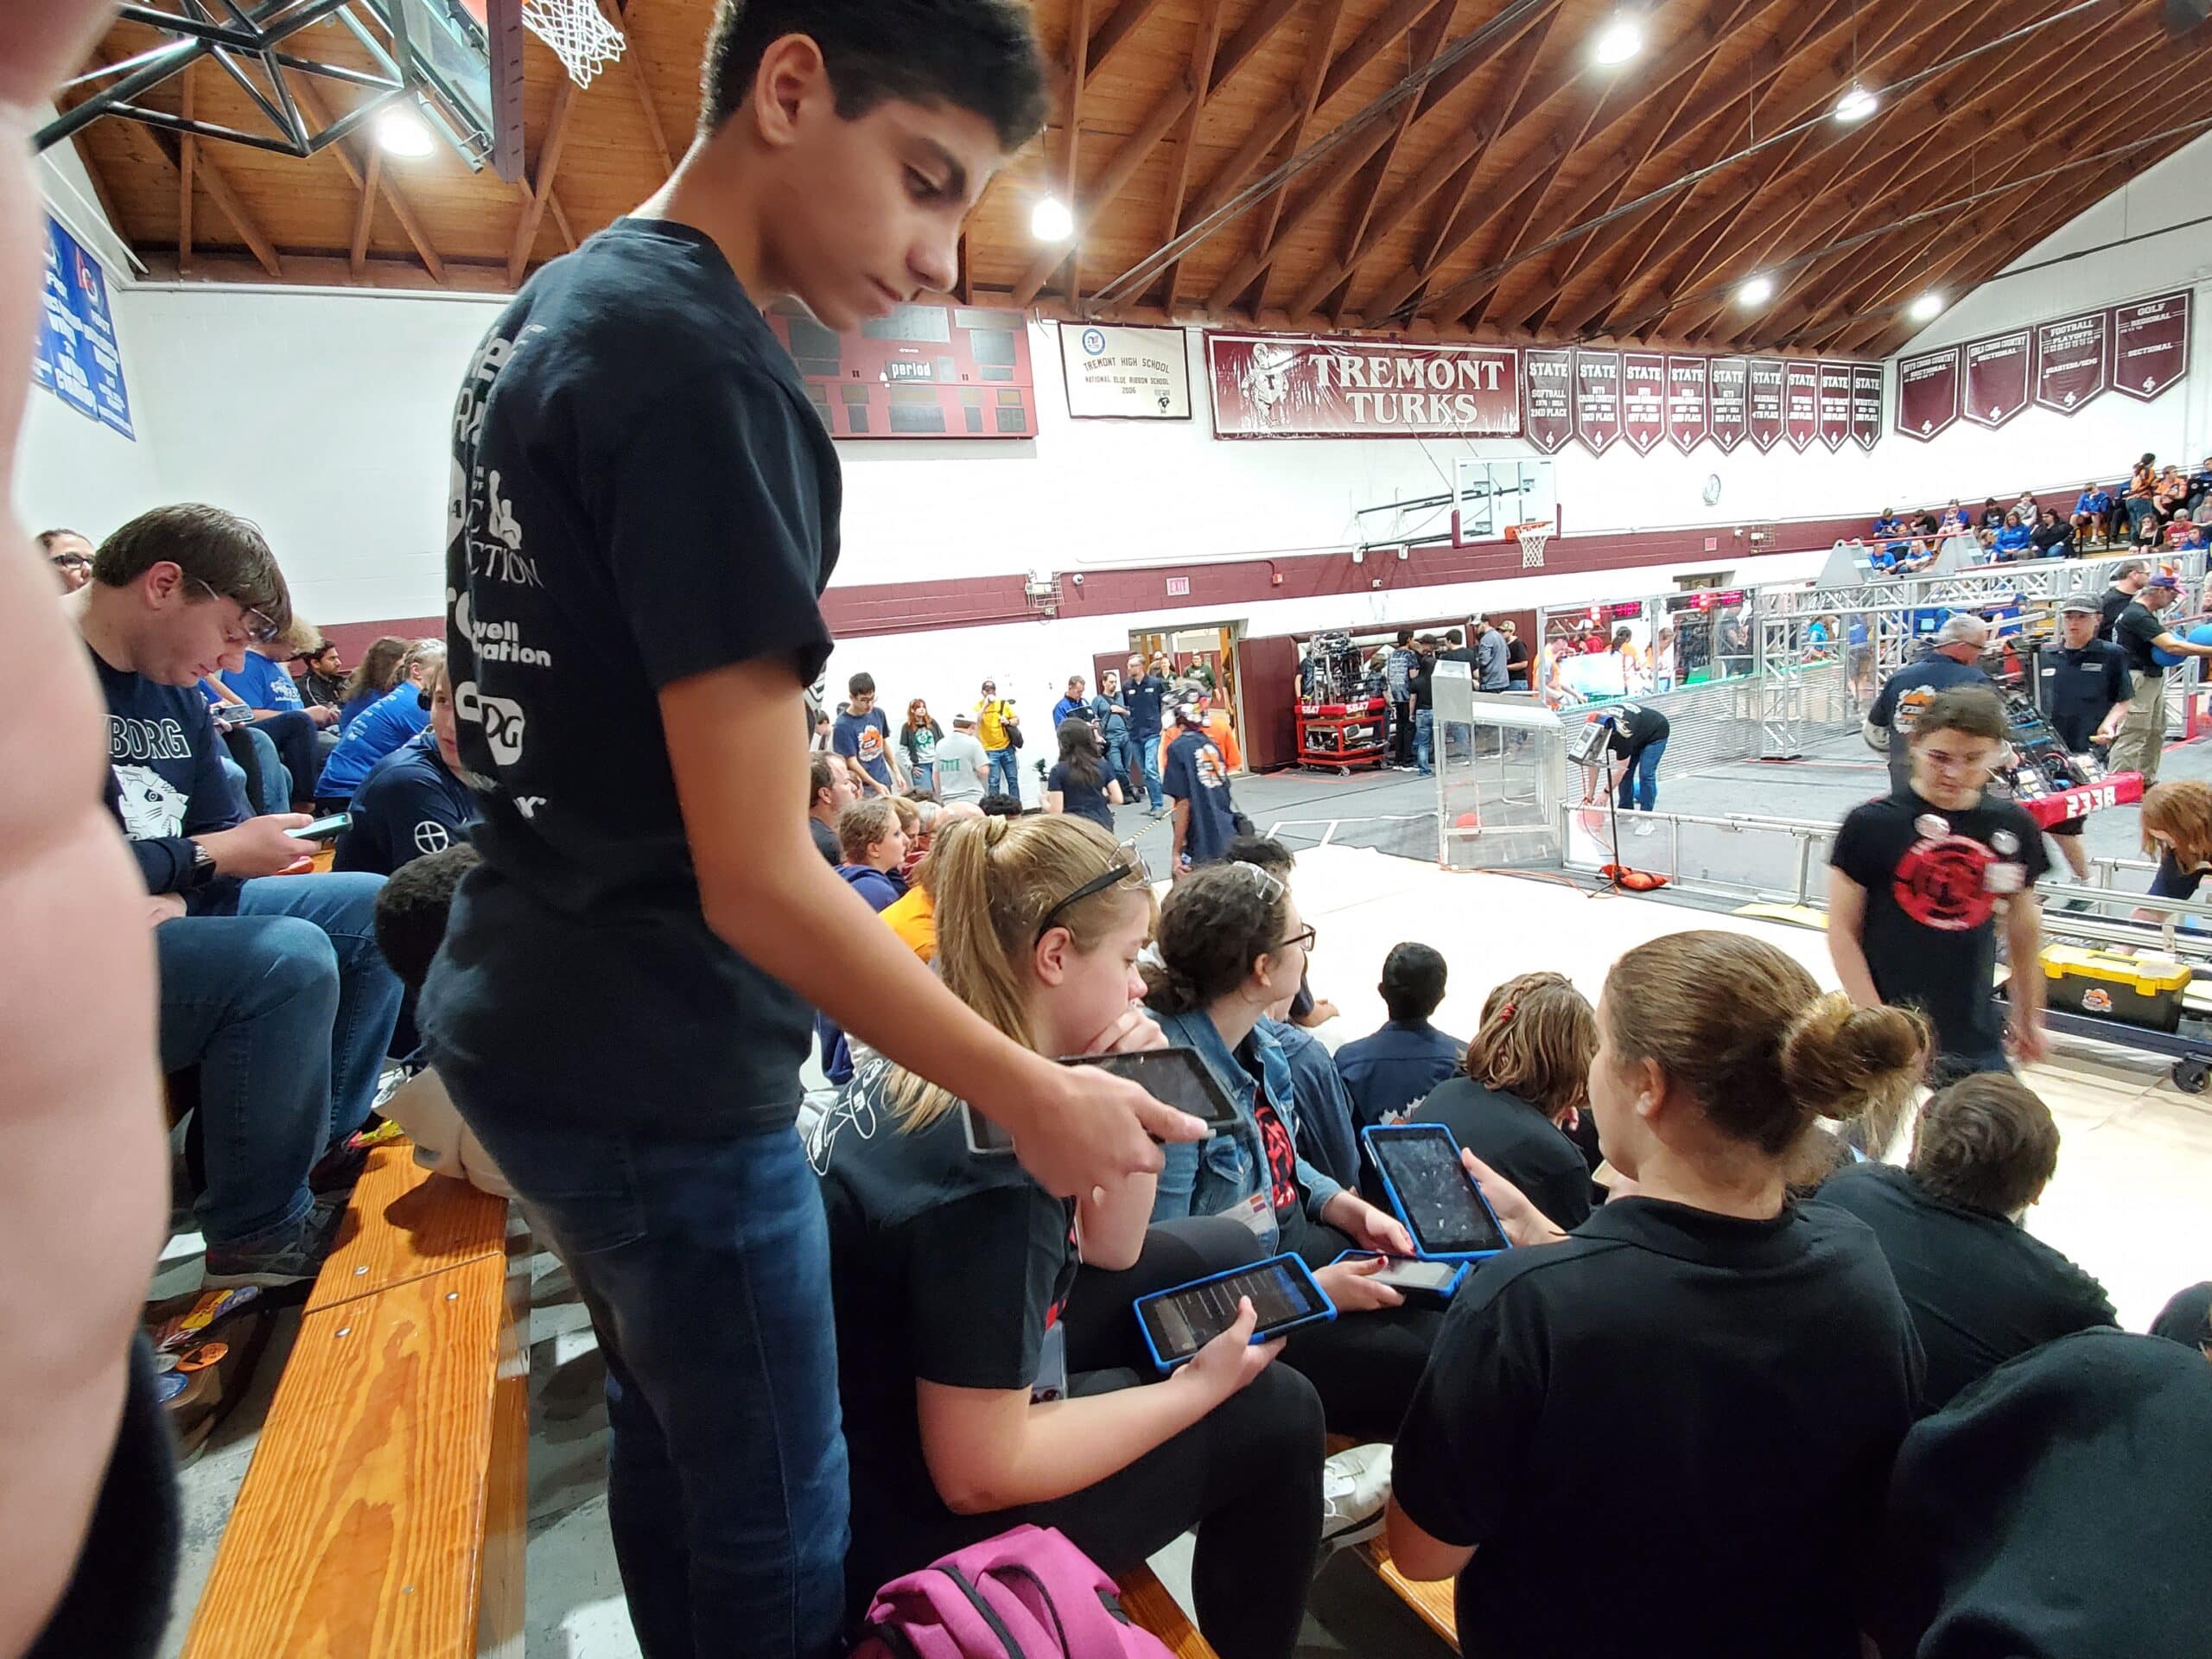 Sharing Scouting Data with the Warriorbots from Muskego by Syncing the App on the Tablets